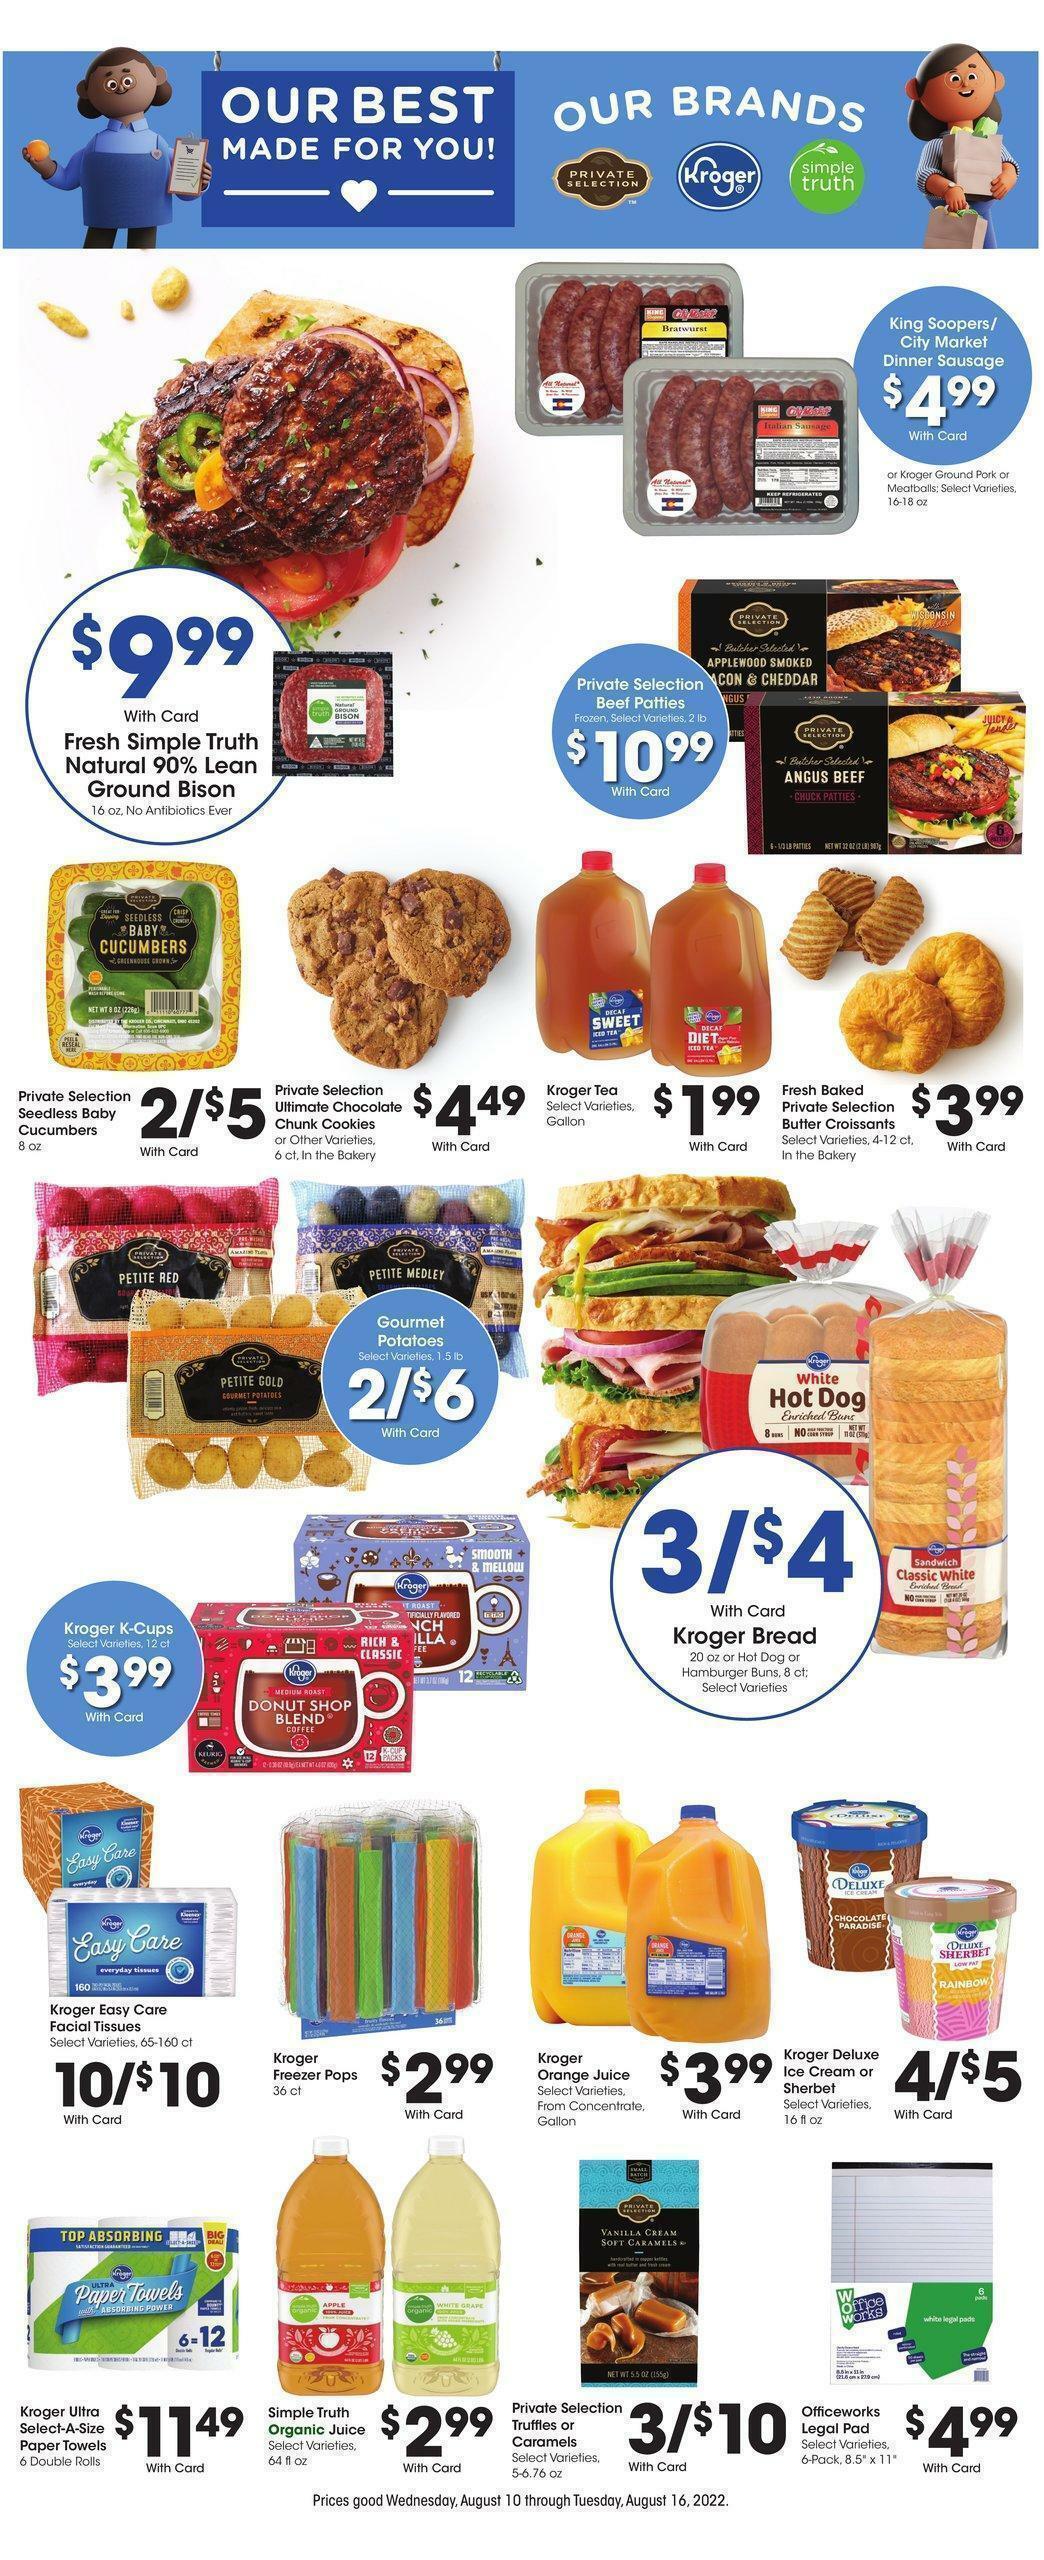 City Market Weekly Ad from August 10